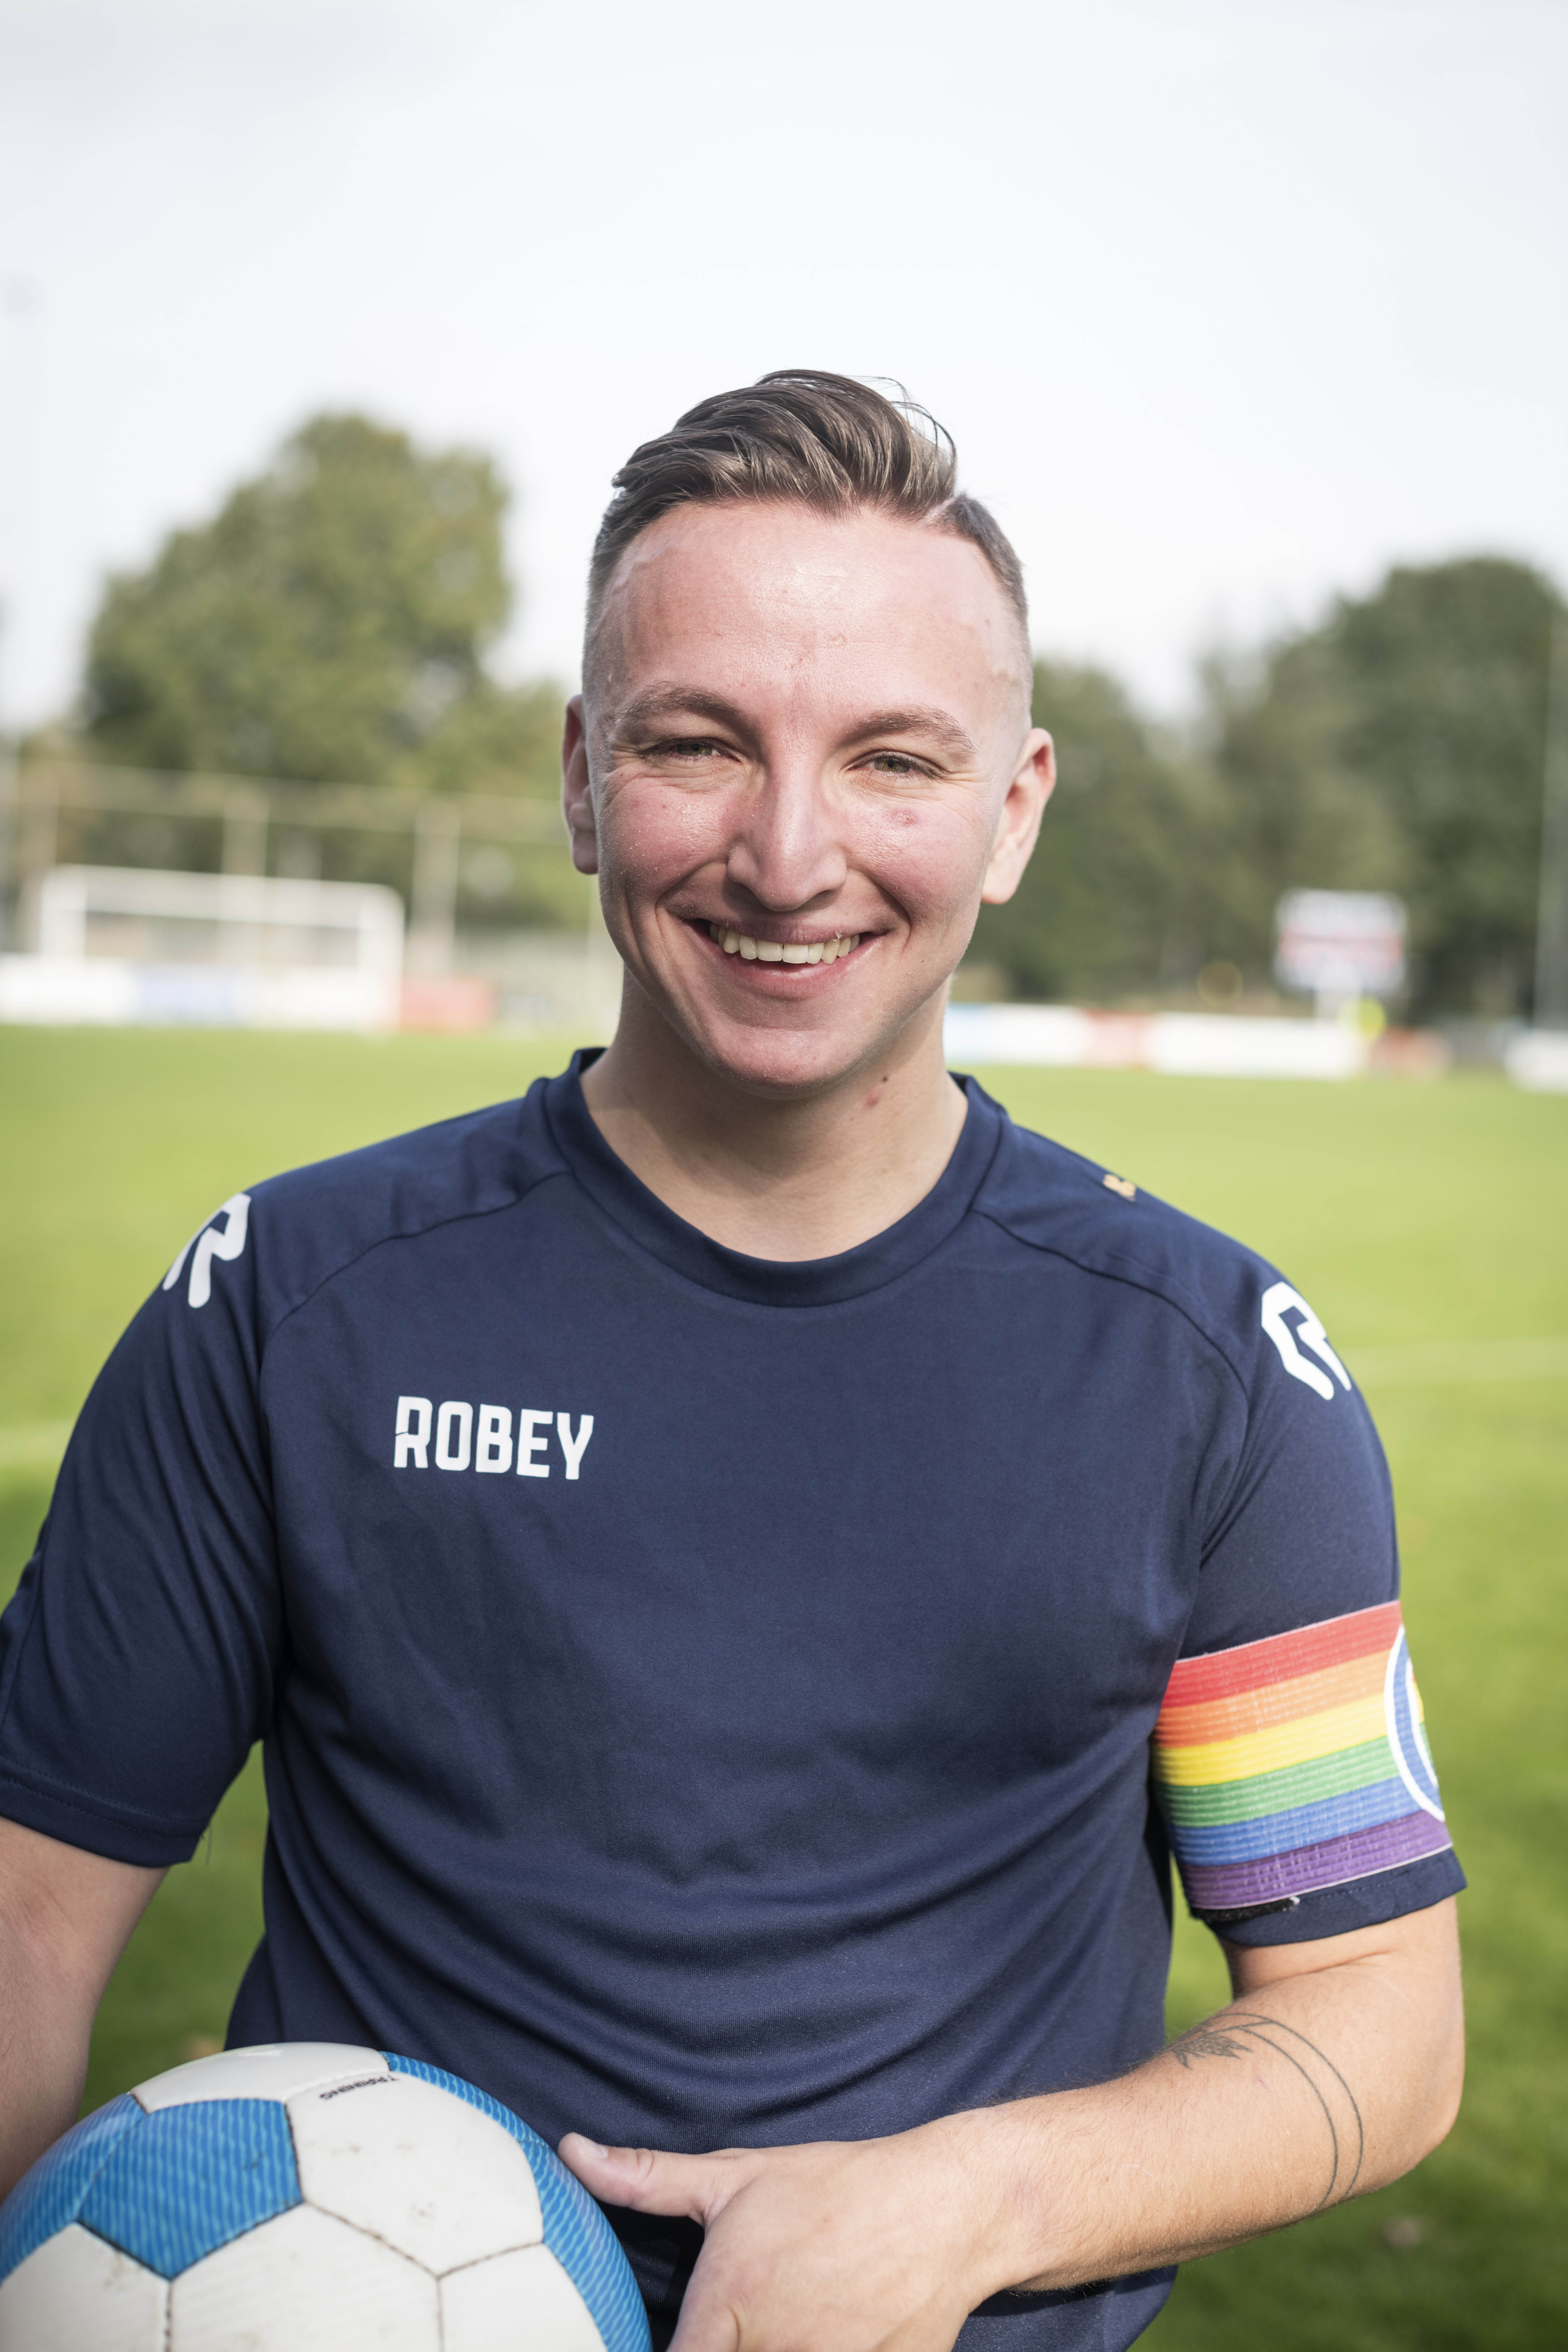 portrait of a football player standing on the pitch. He's wearing a blue shirt with Robey written on it, a rainbow armband and they're carrying a white and blue ball